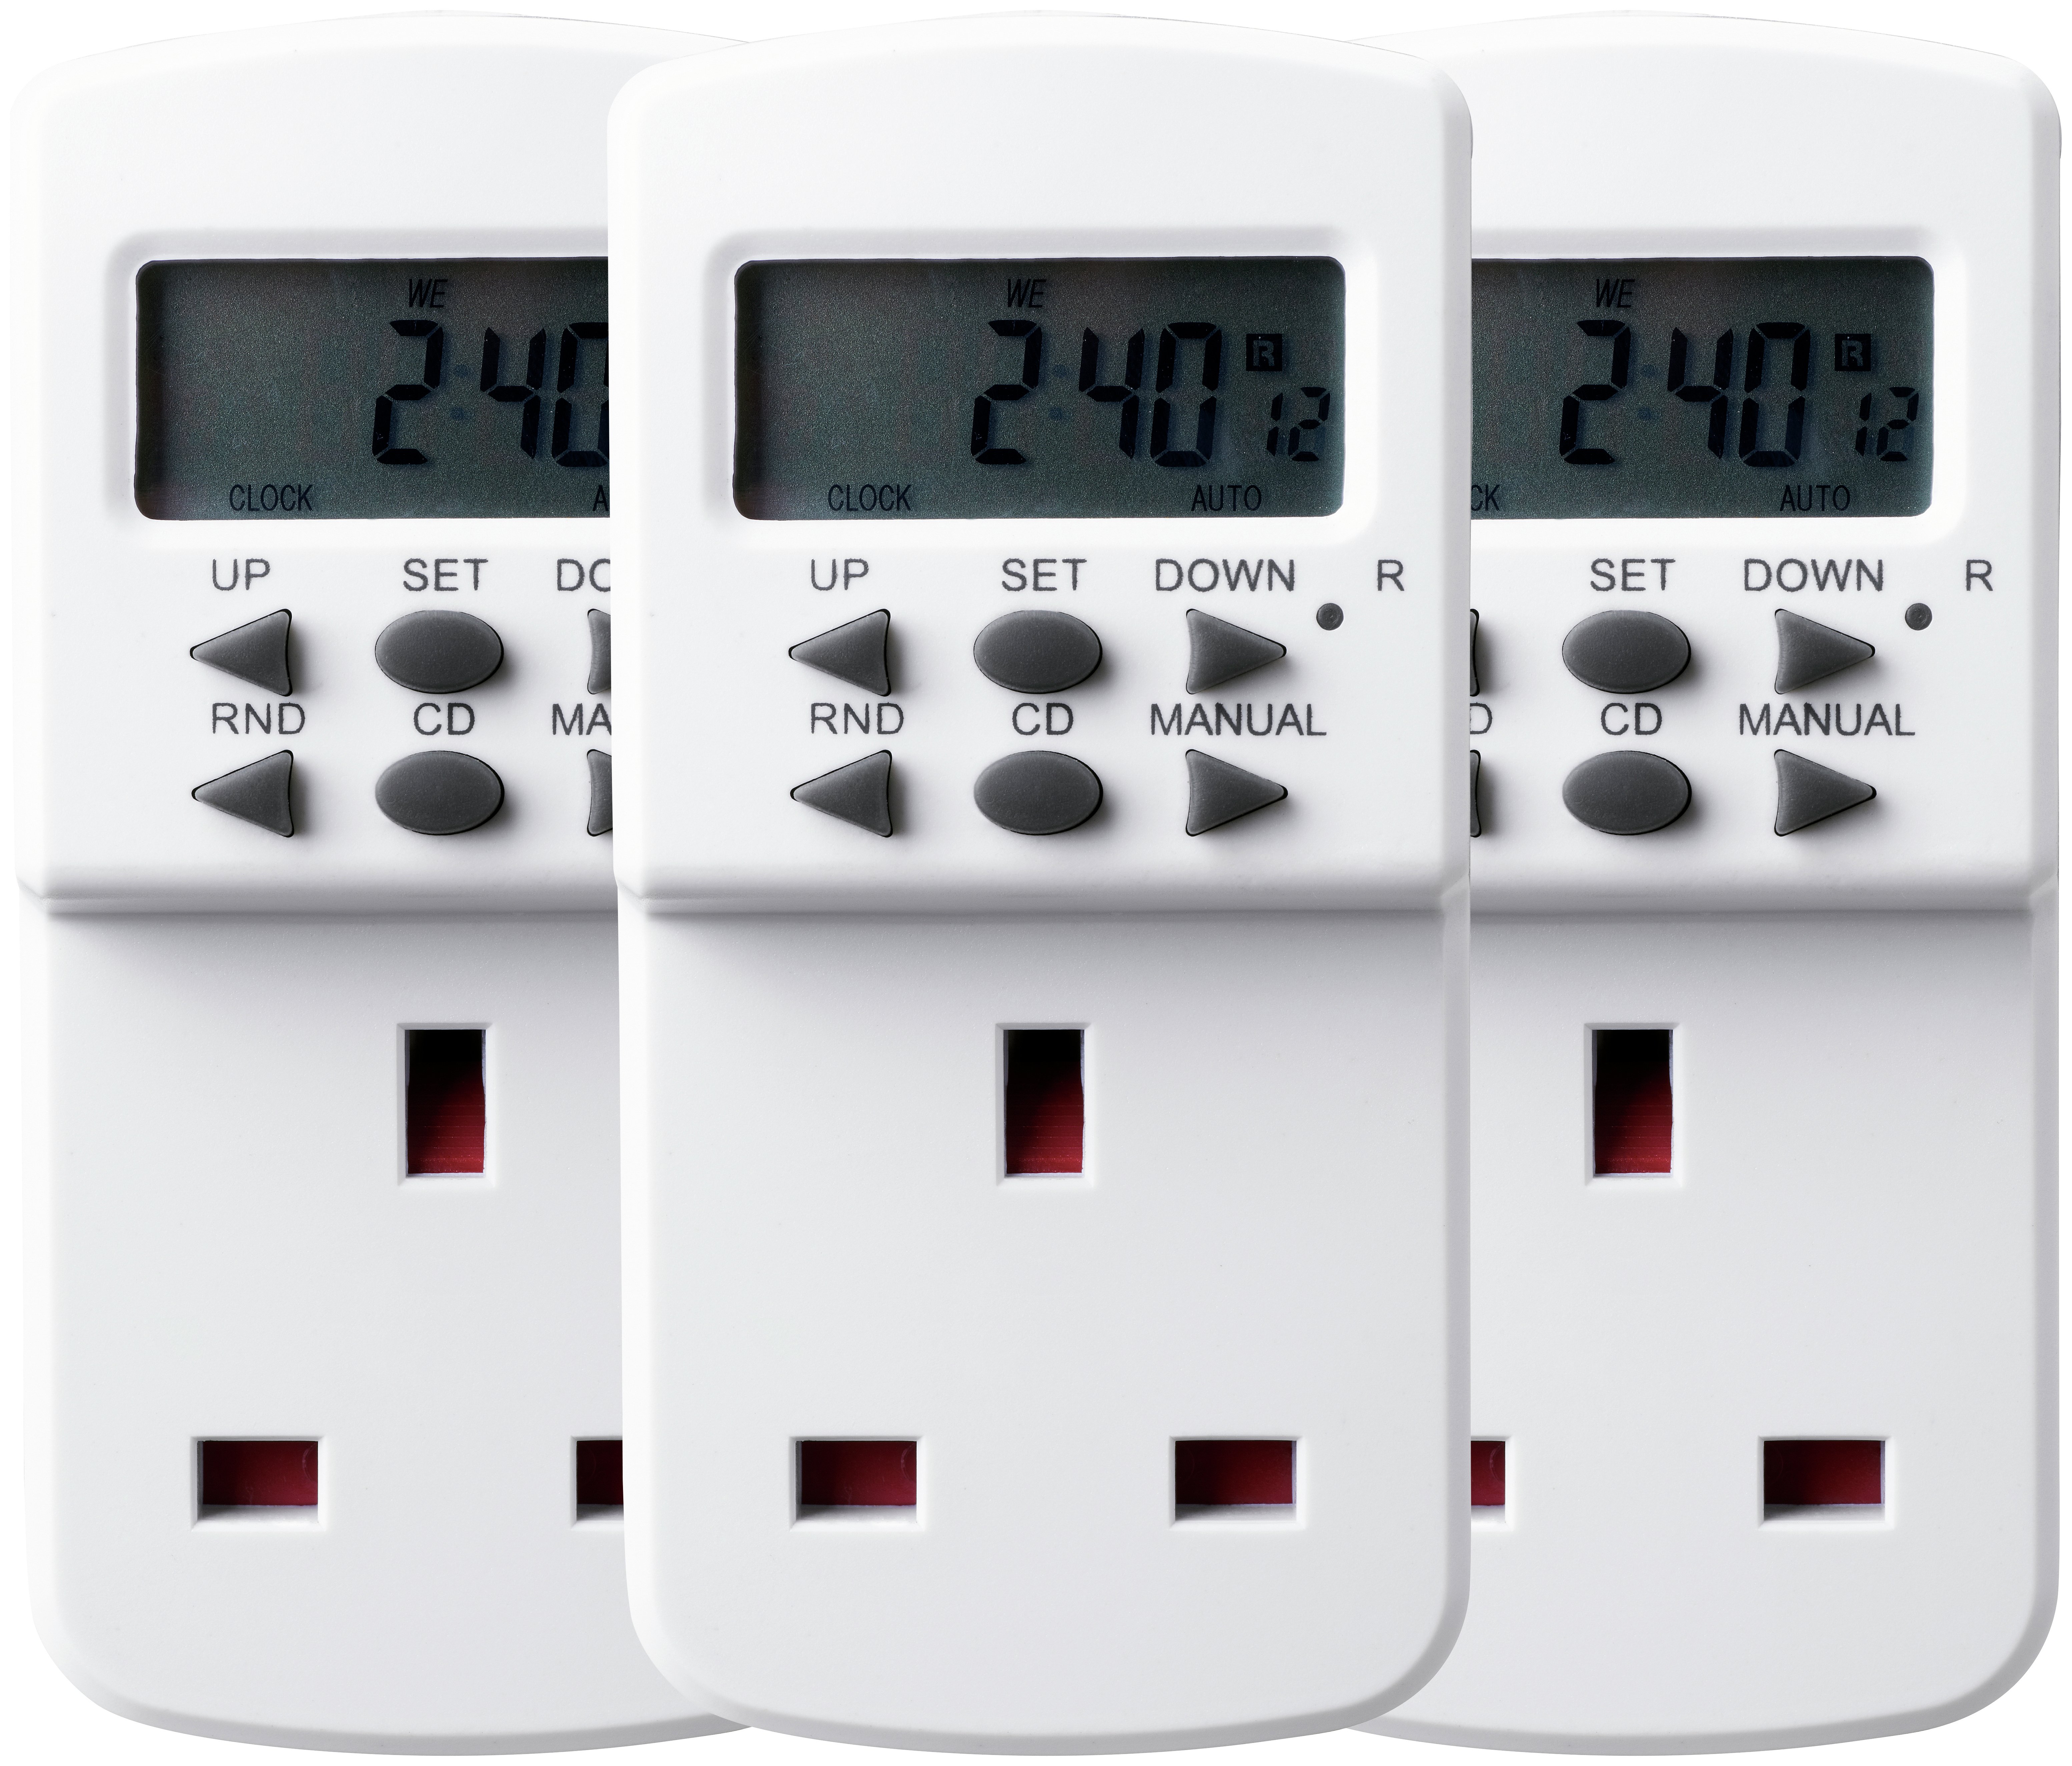 Triple Pack 7-Day Electronic Timers Review